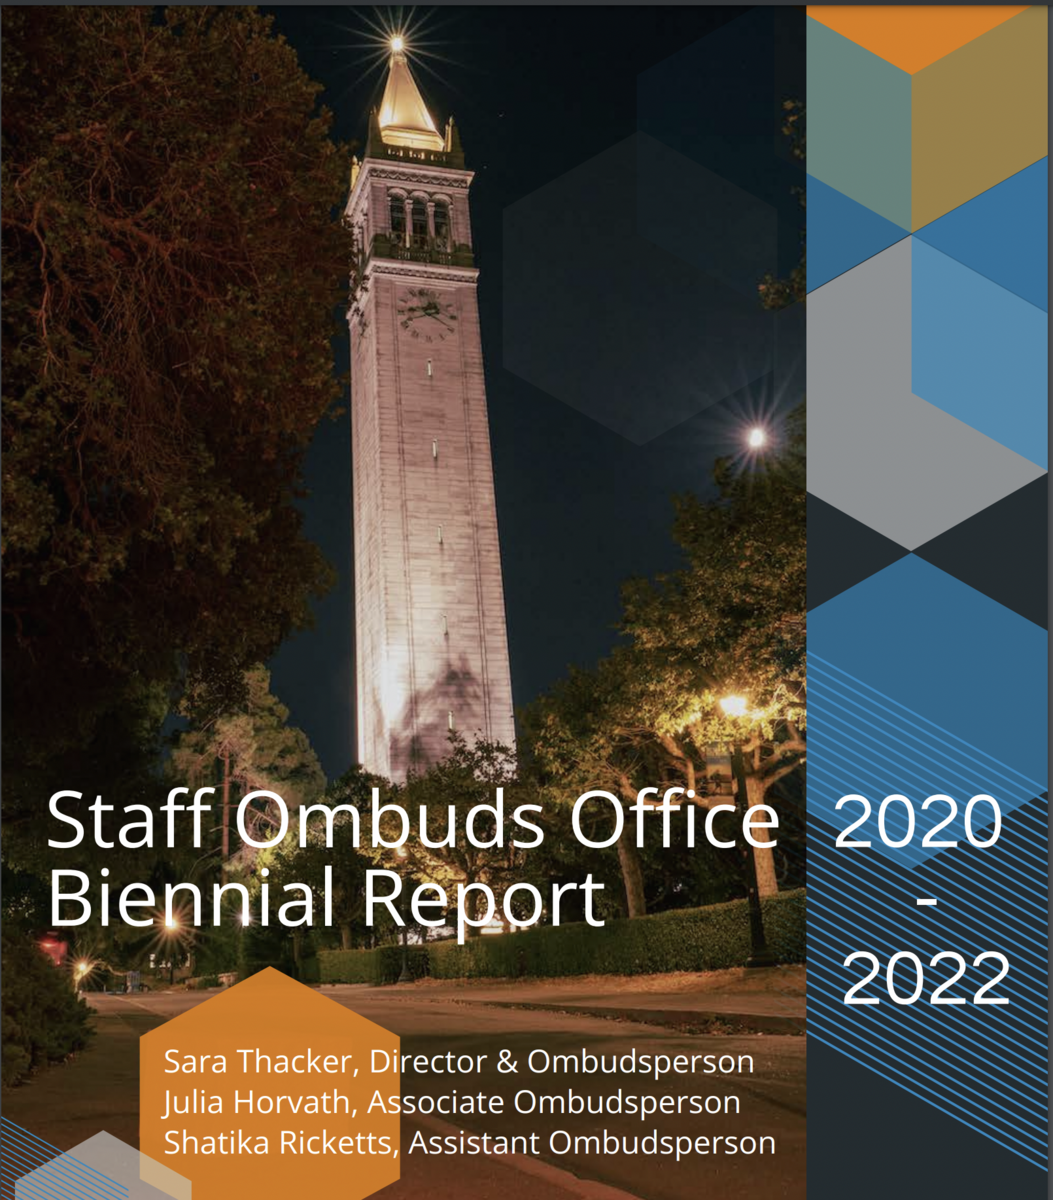 Picture-Staff Ombuds Office Biennial Report